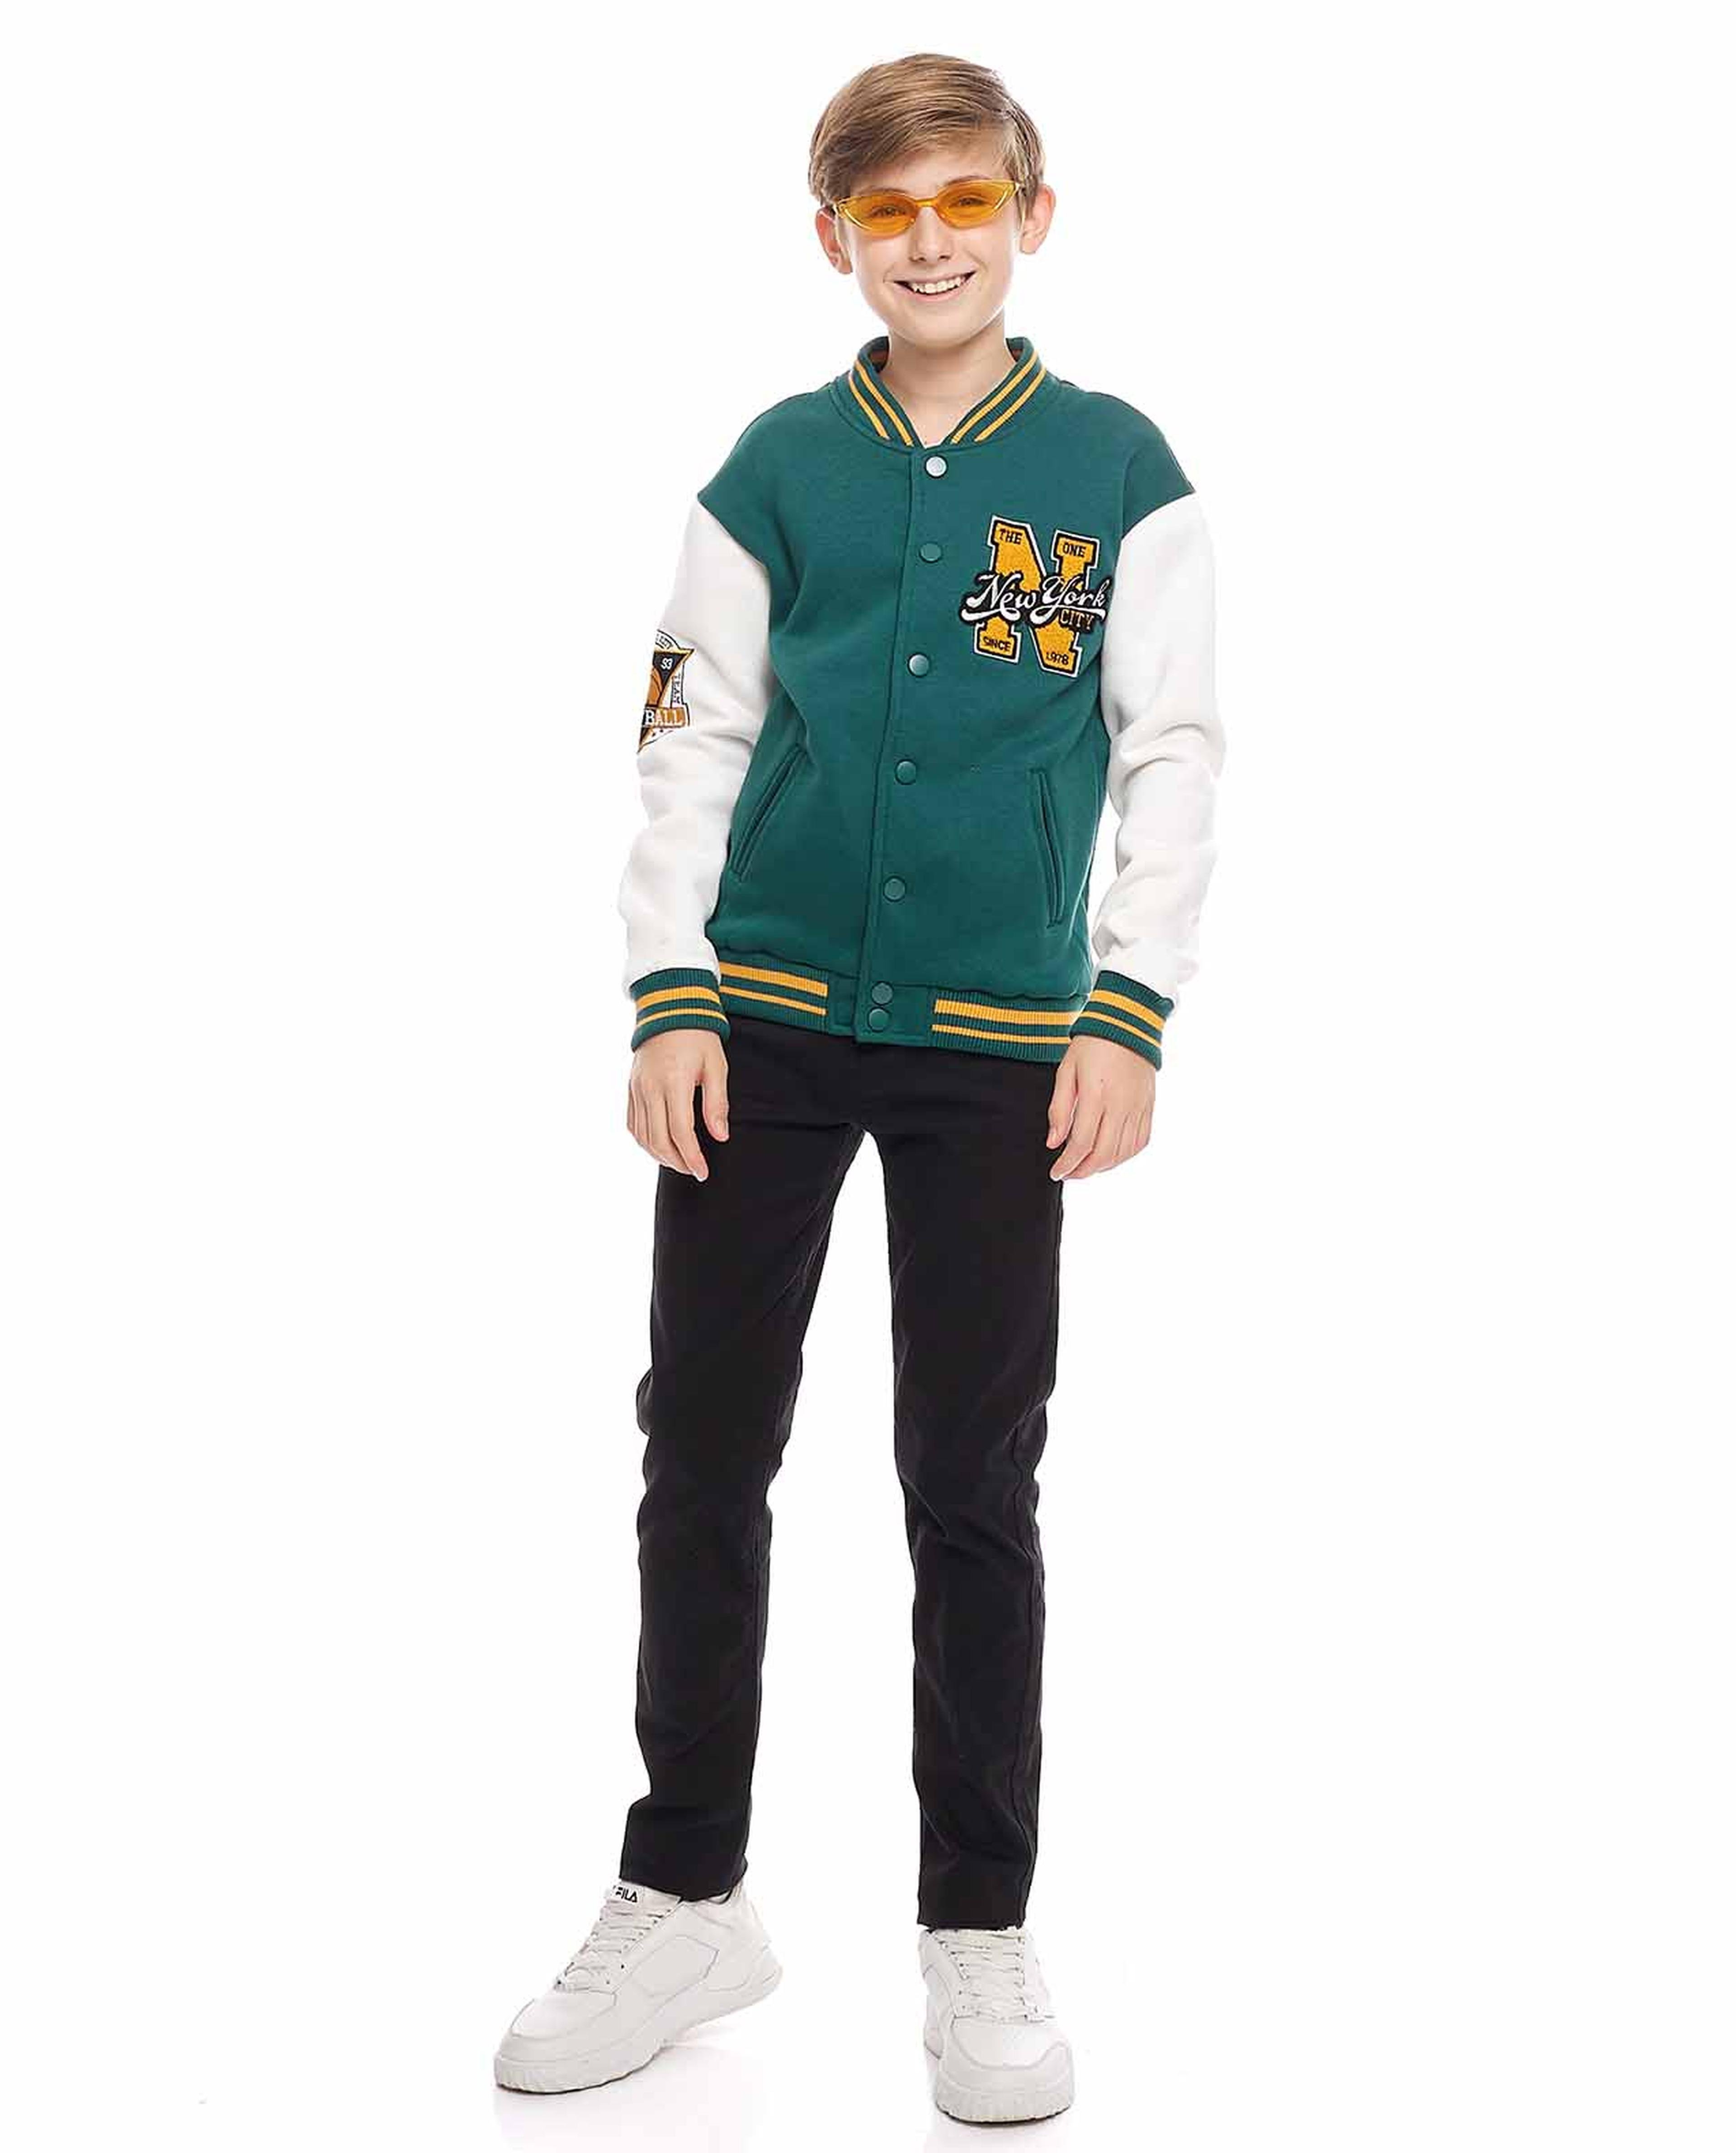 Embroidered Varsity Jacket with Snap Closure